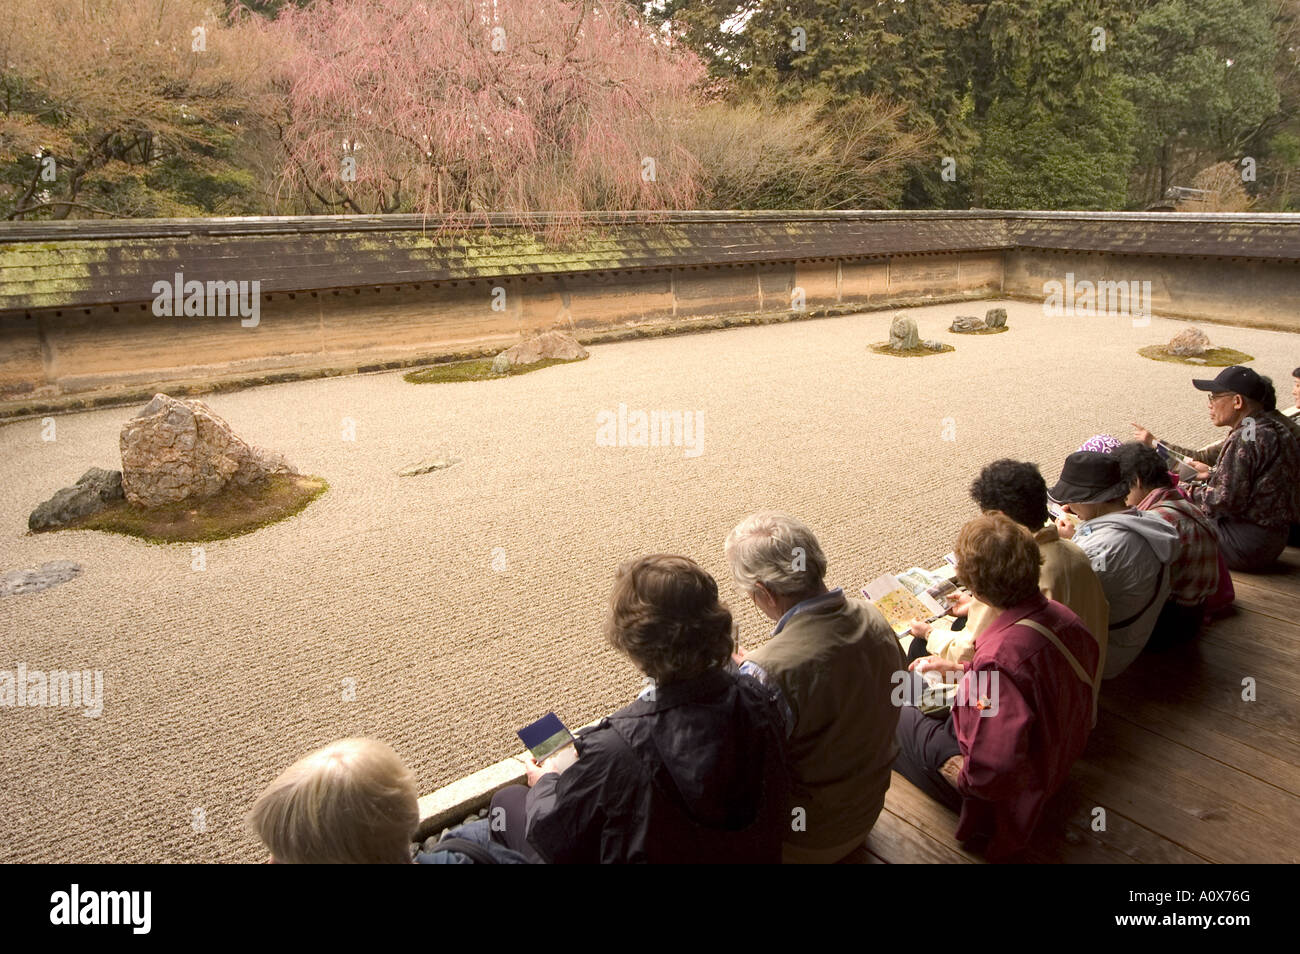 Watching and contemplating at Ryoanji temple dry stone garden and blossom UNESCO World Heritage Site Kyoto city Honshu island Stock Photo